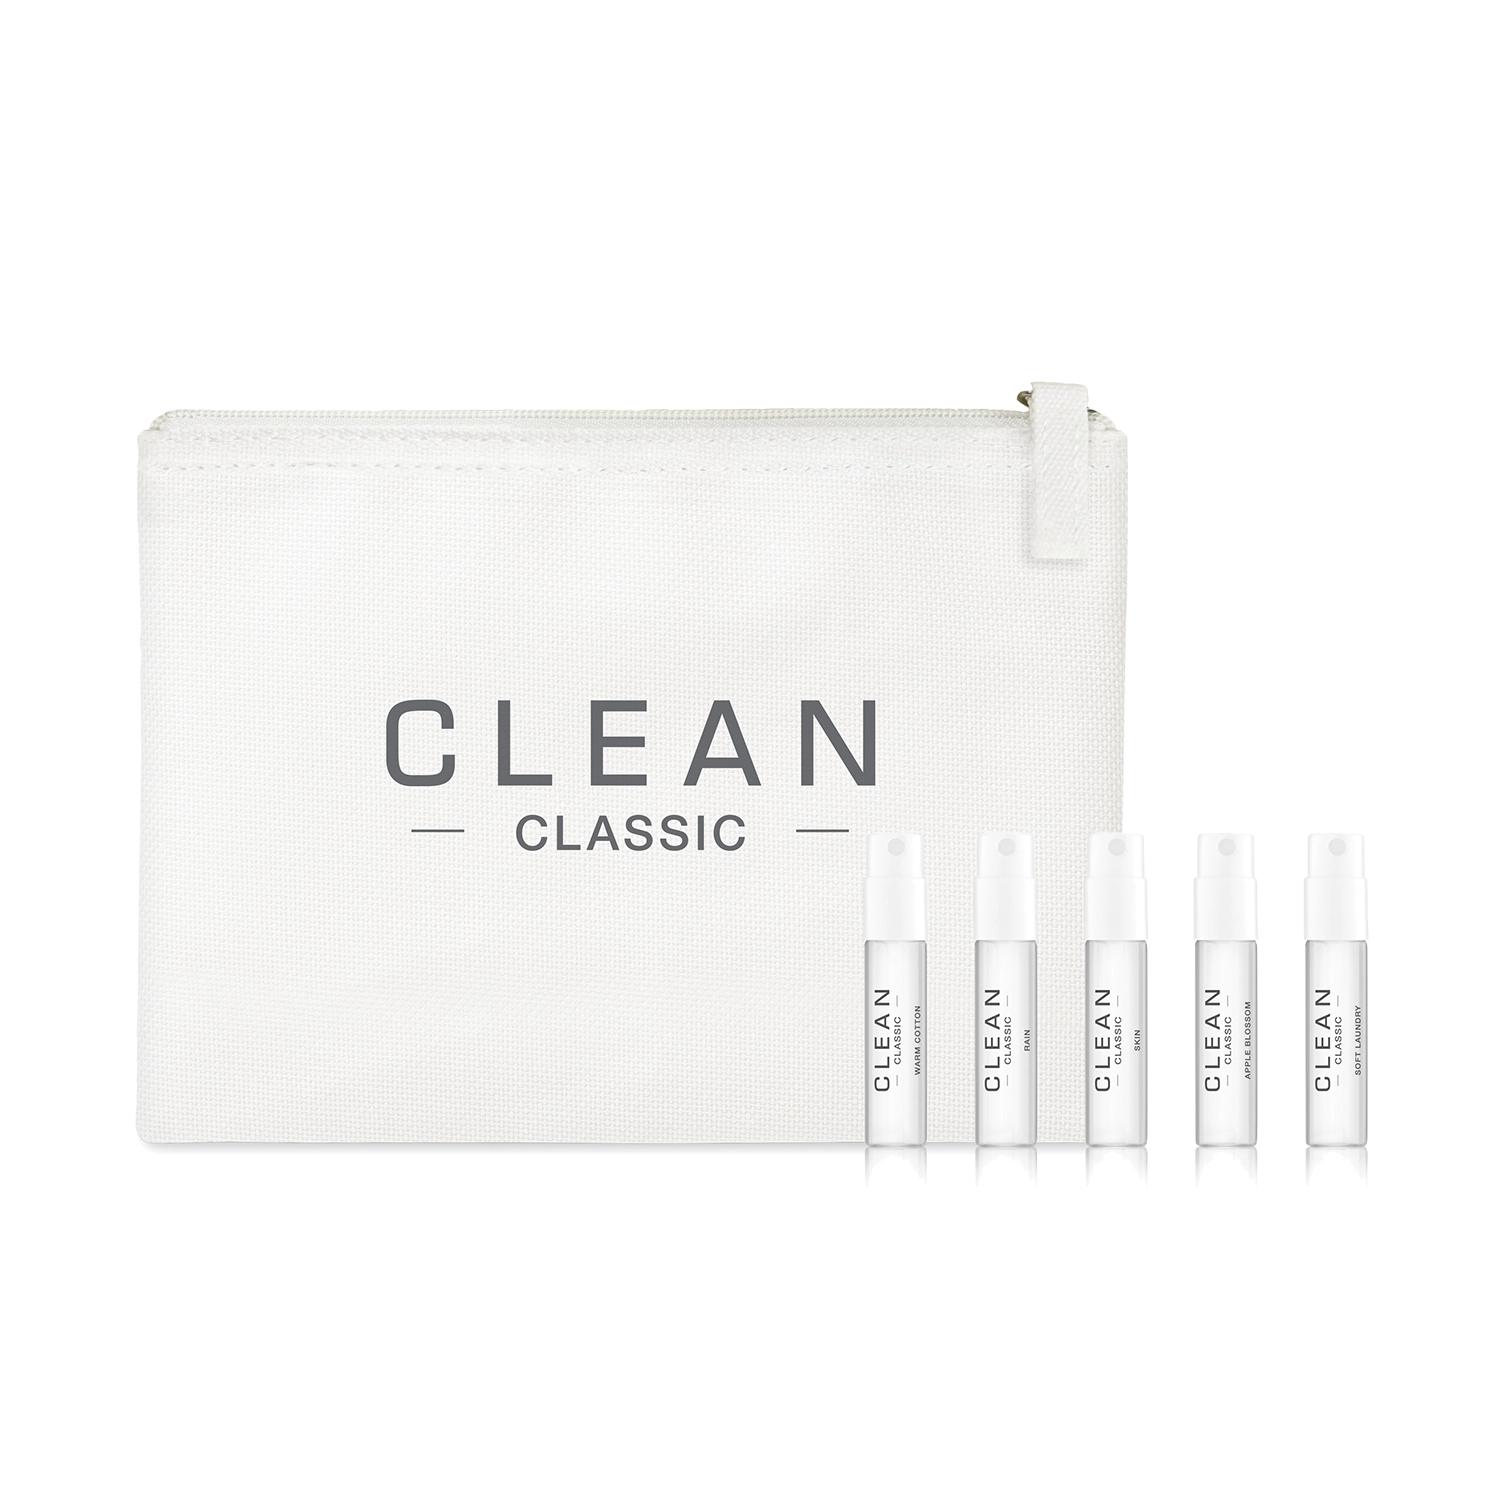 Clean Classic Pure Soap  Clean Perfume by Clean Beauty Collective